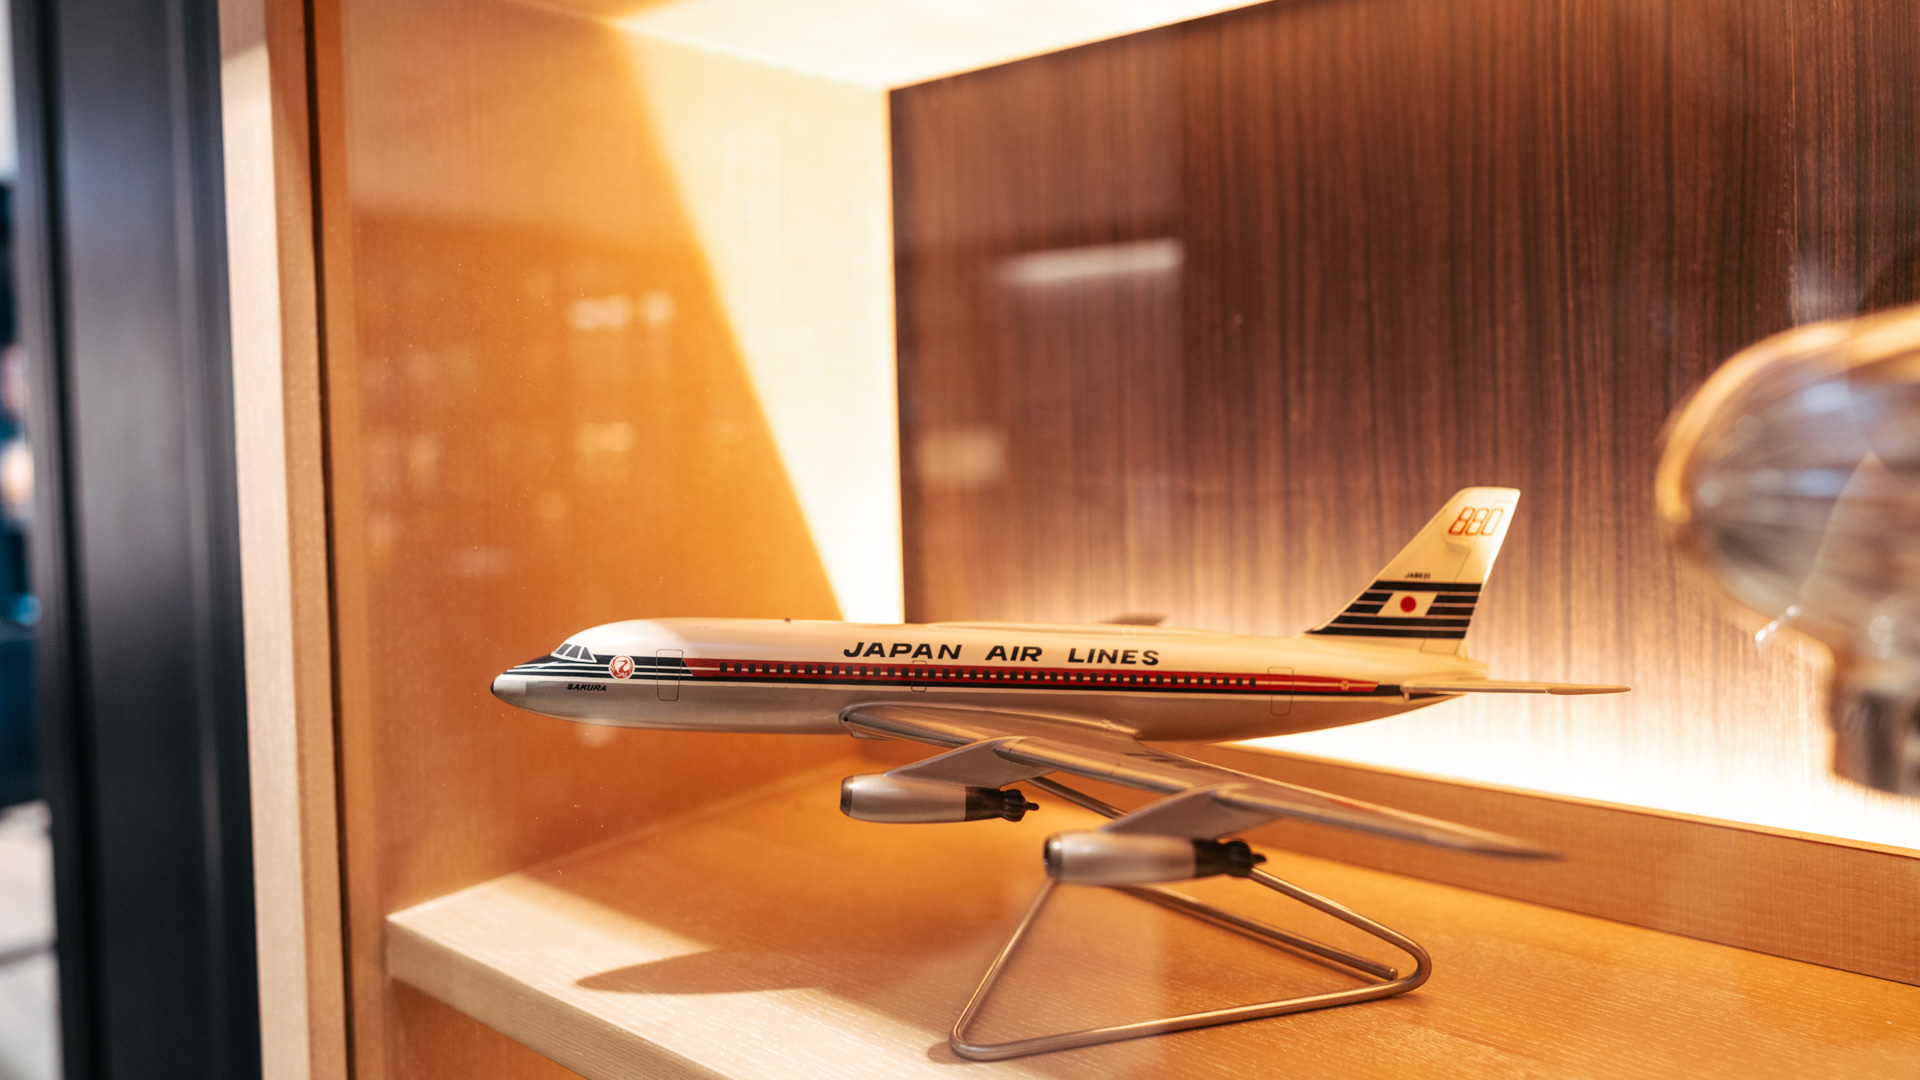 Japan Airlines First Class Lounge Tokyo Haneda model plane